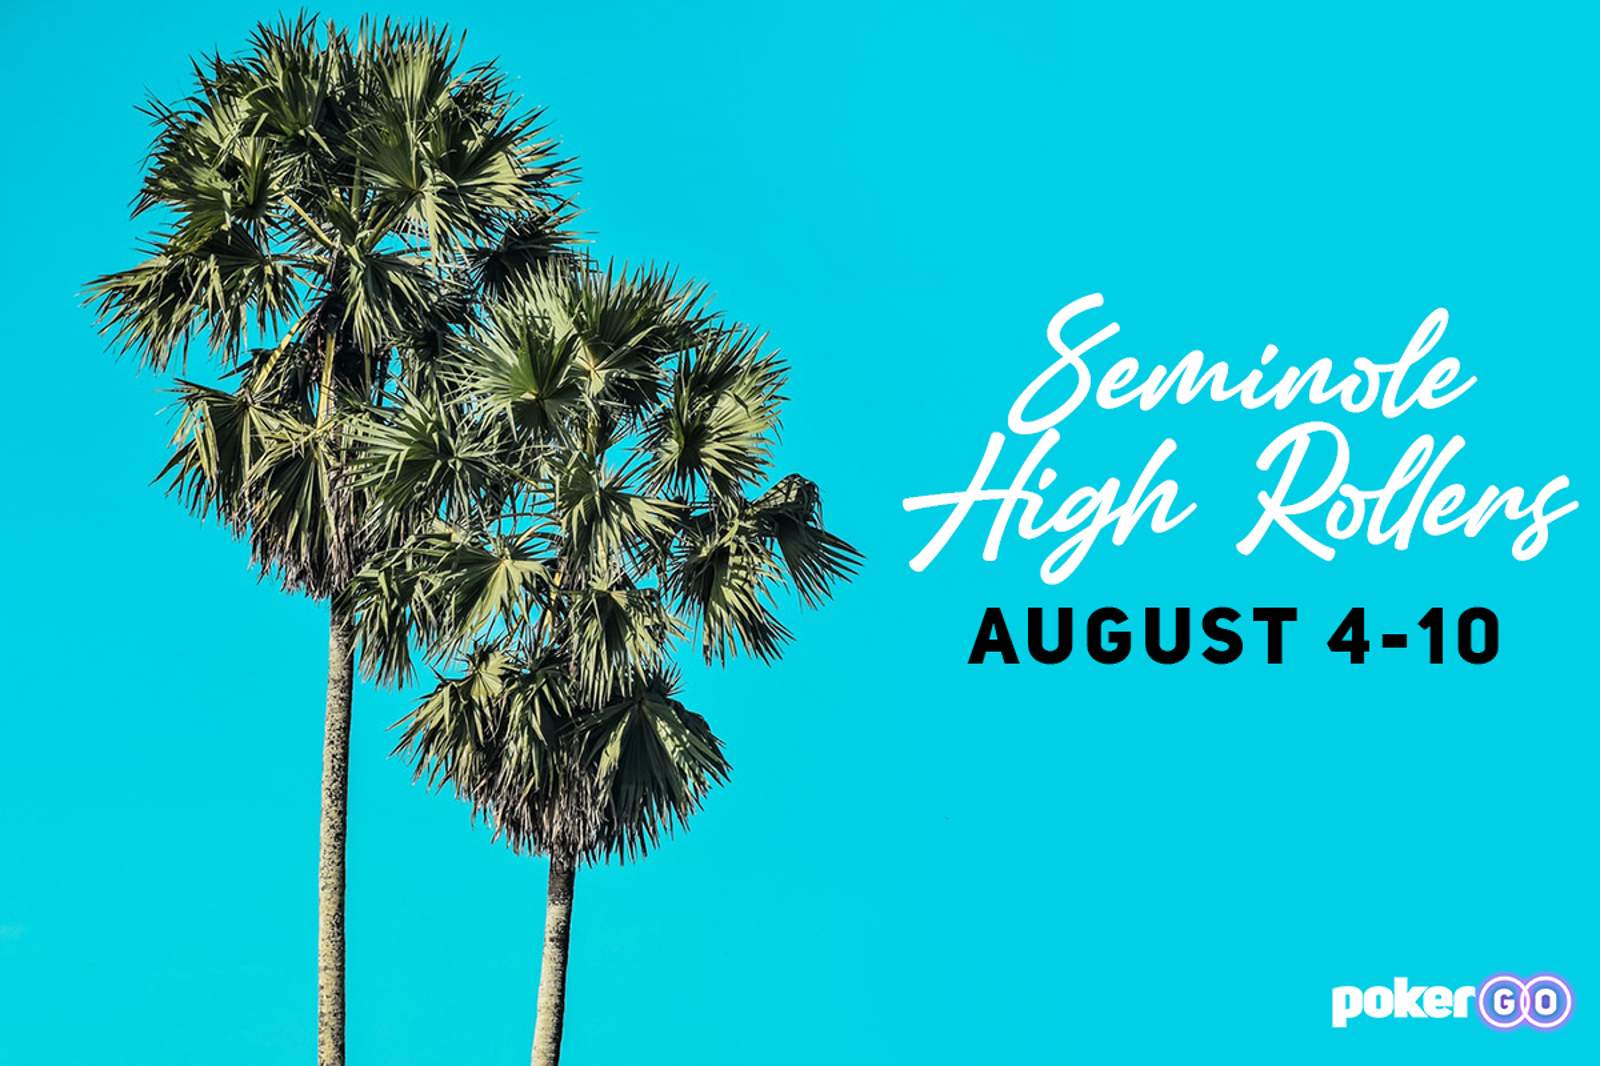 Seminole to Host 5 High Roller Events from August 4-10